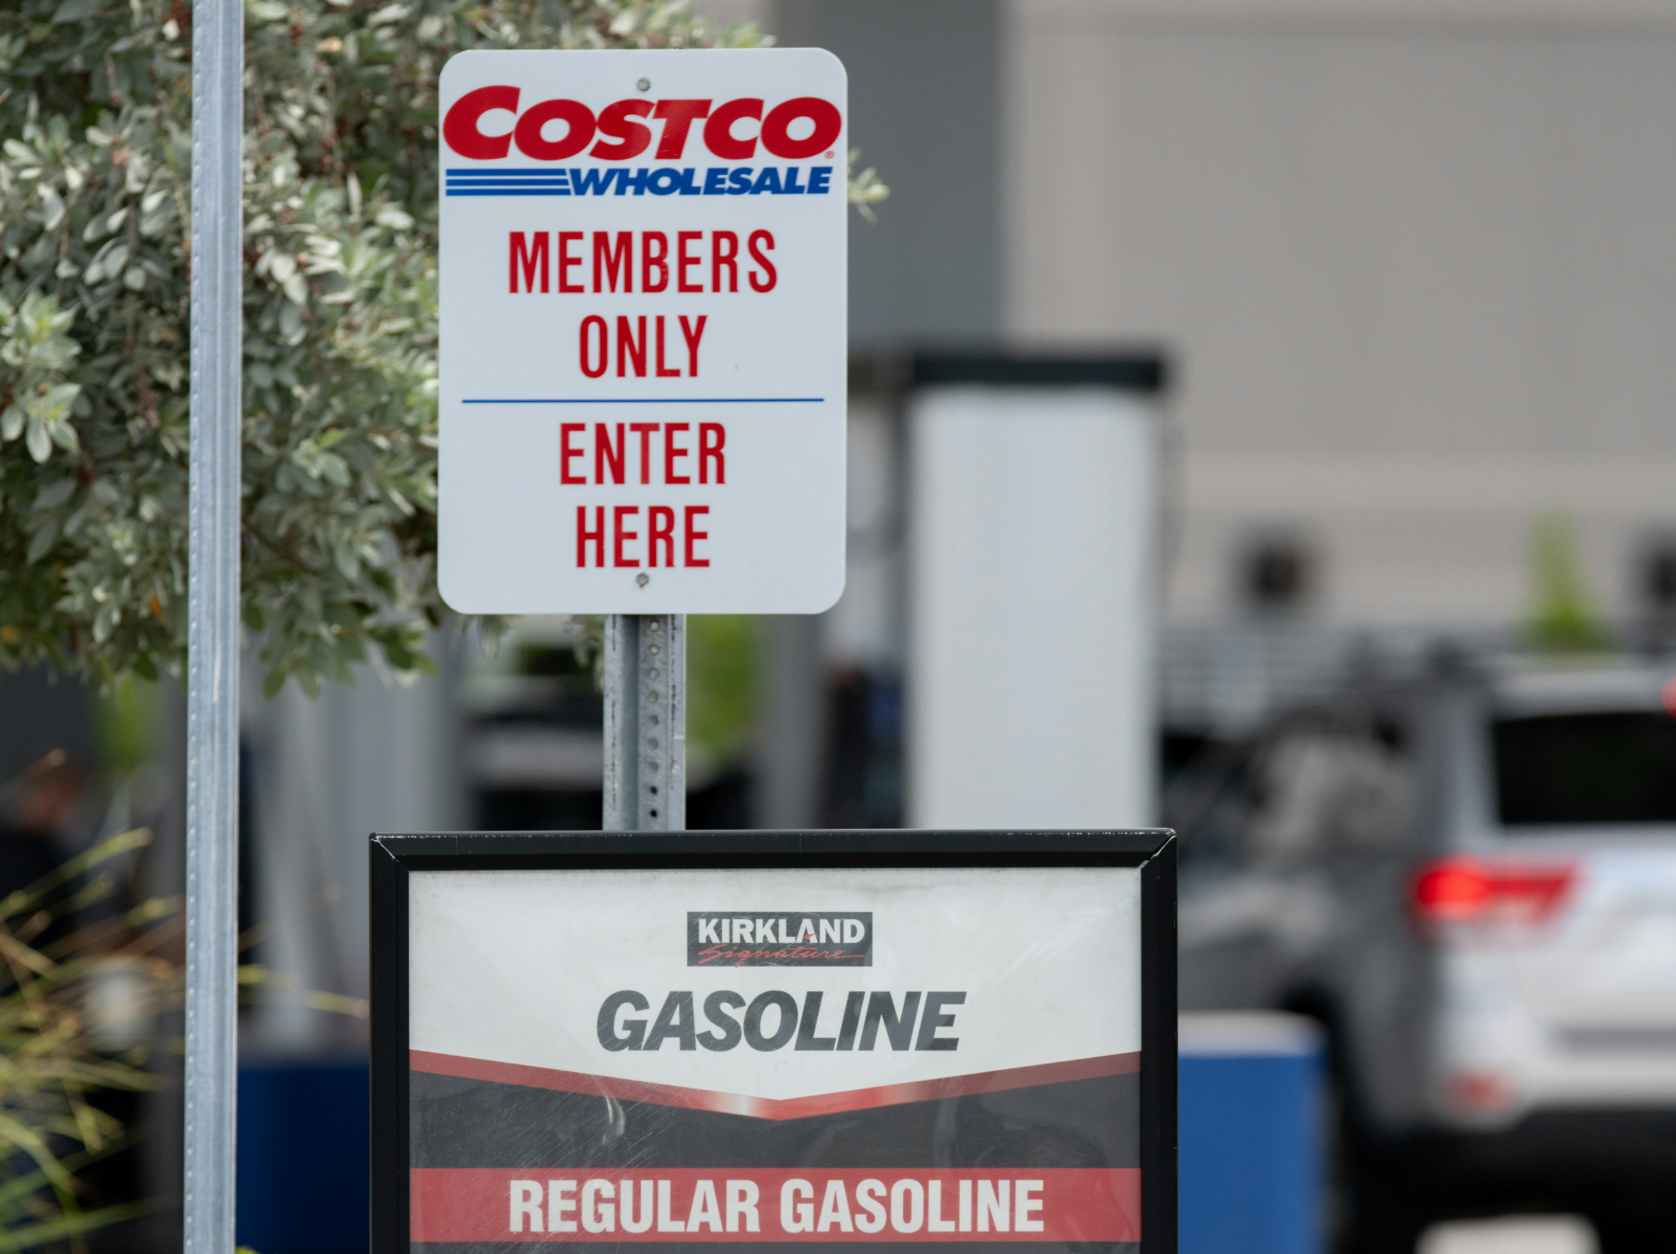 A Costco Members Only sign at the entrance of the gas station.